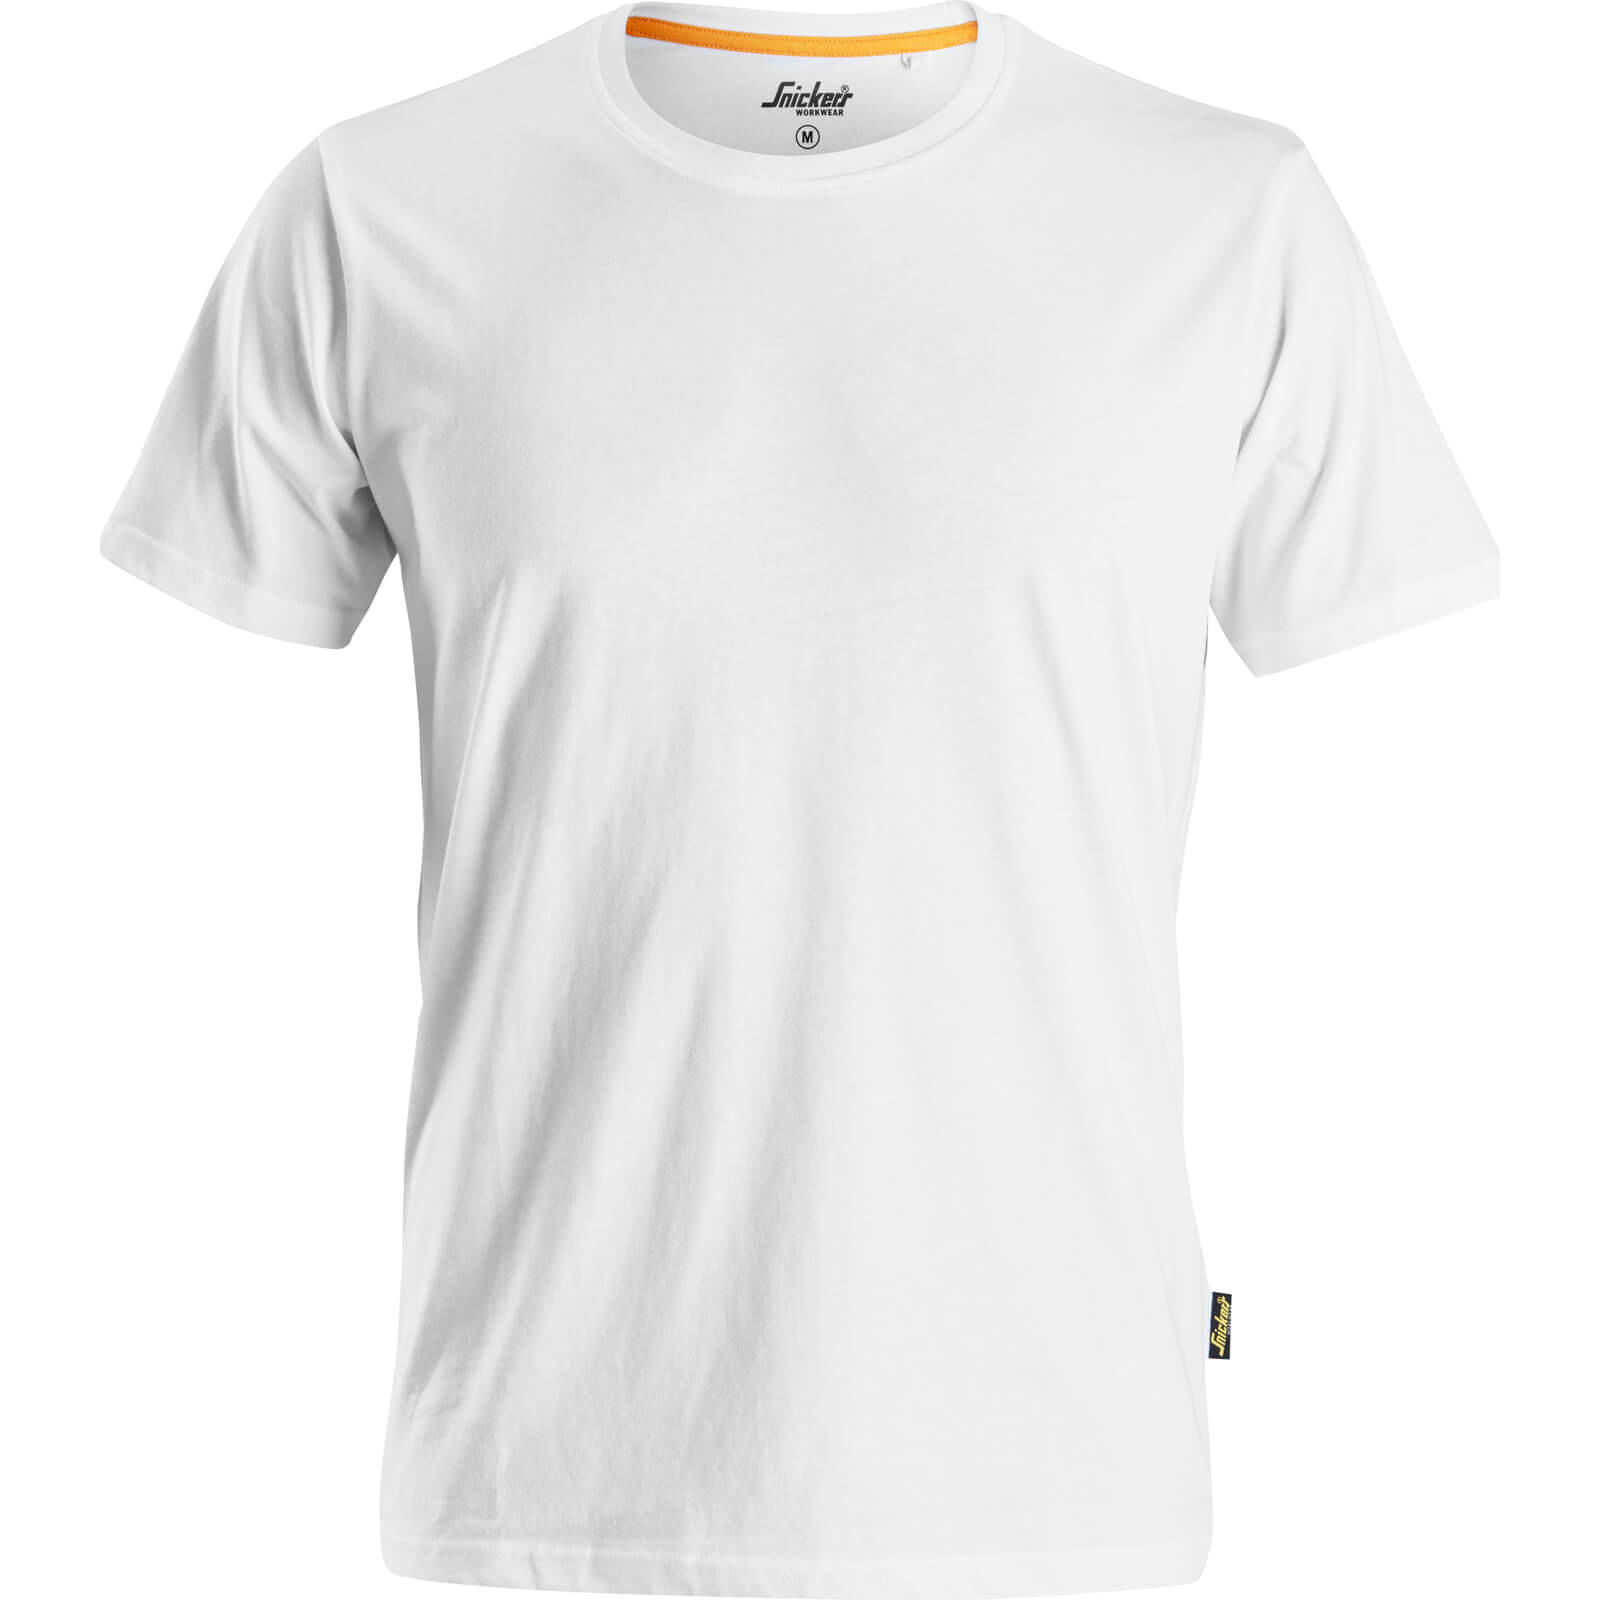 Image of Snickers Allround Work Organic Cotton T Shirt White S